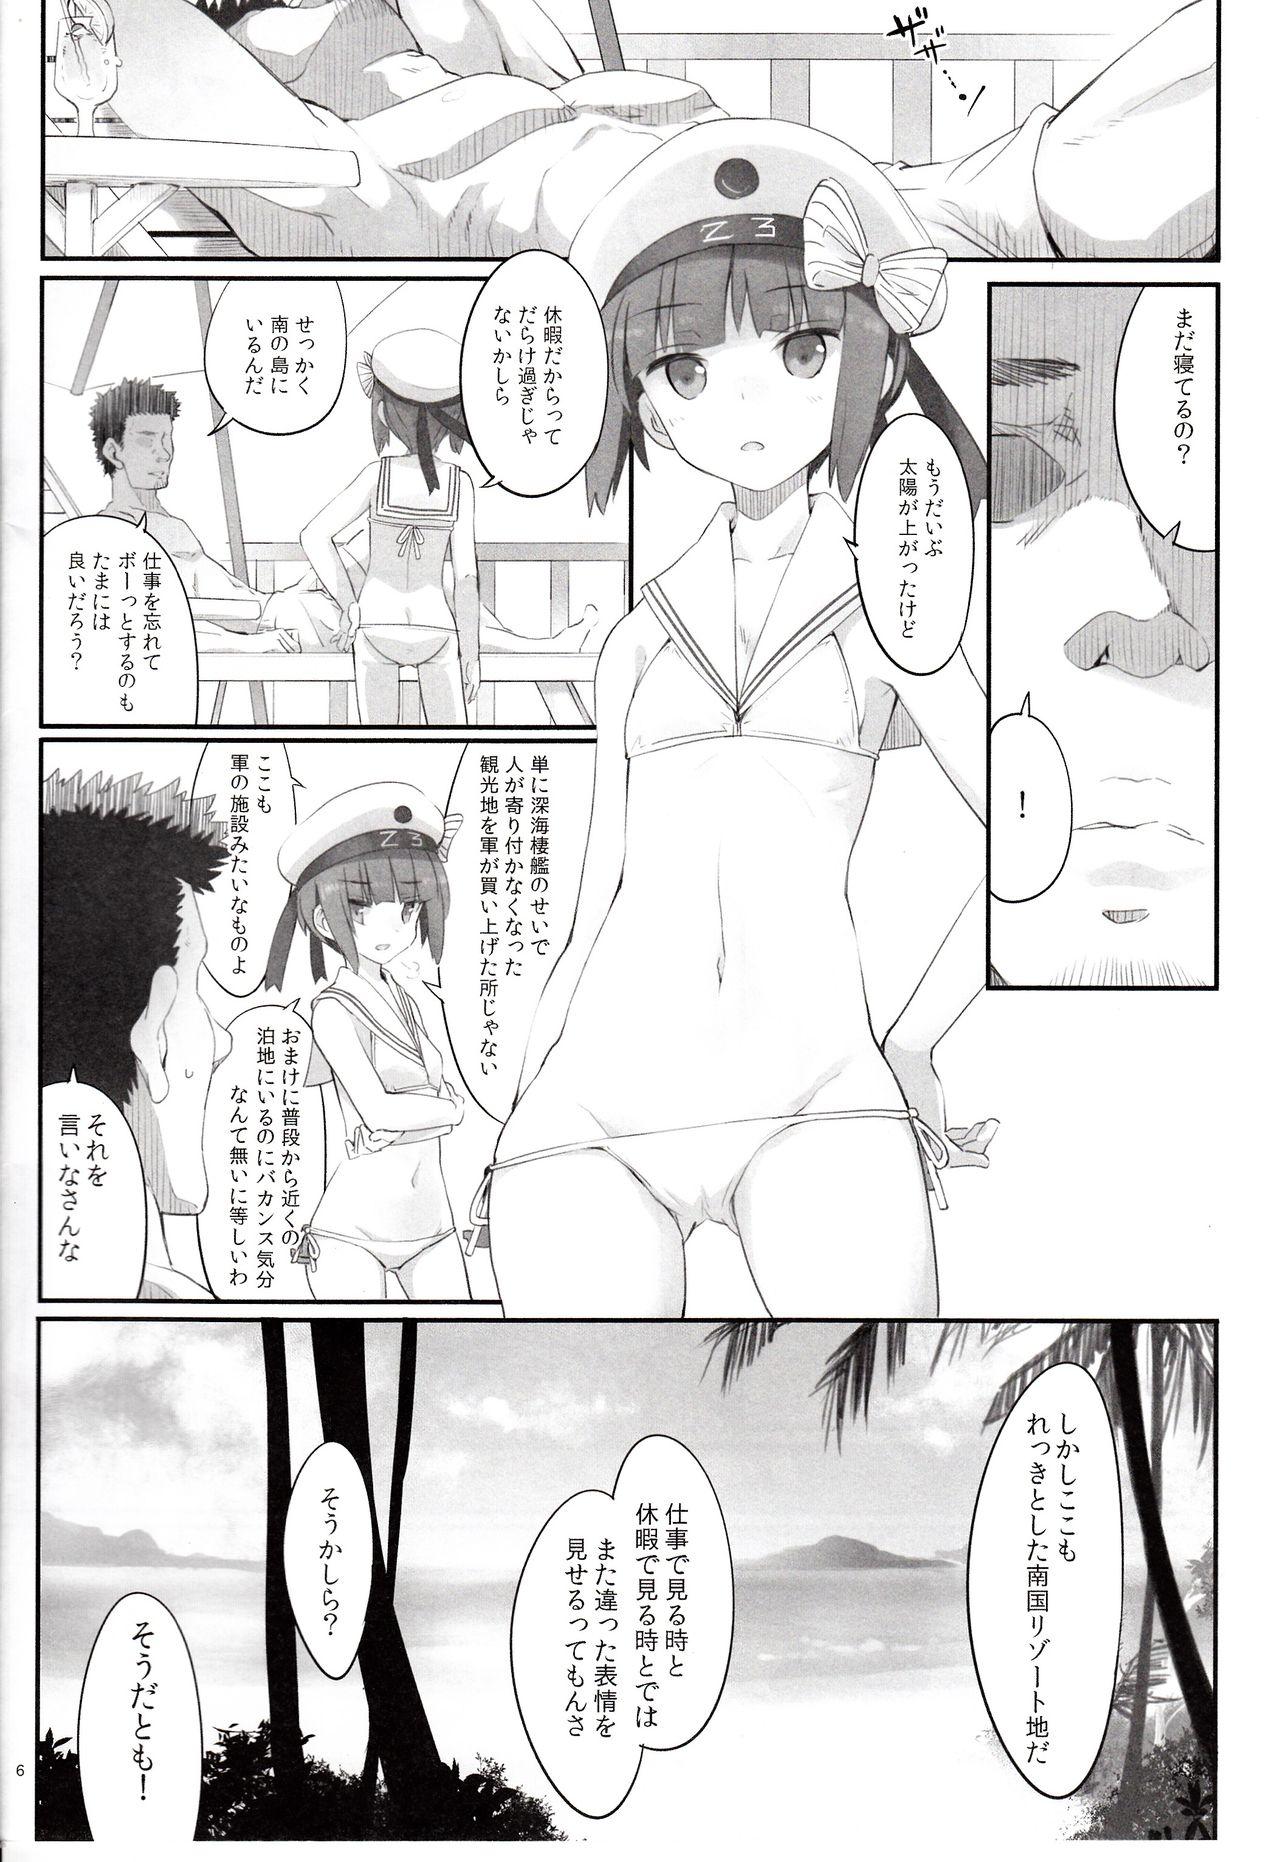 Studs Hot Vacation - Kantai collection Awesome - Page 5